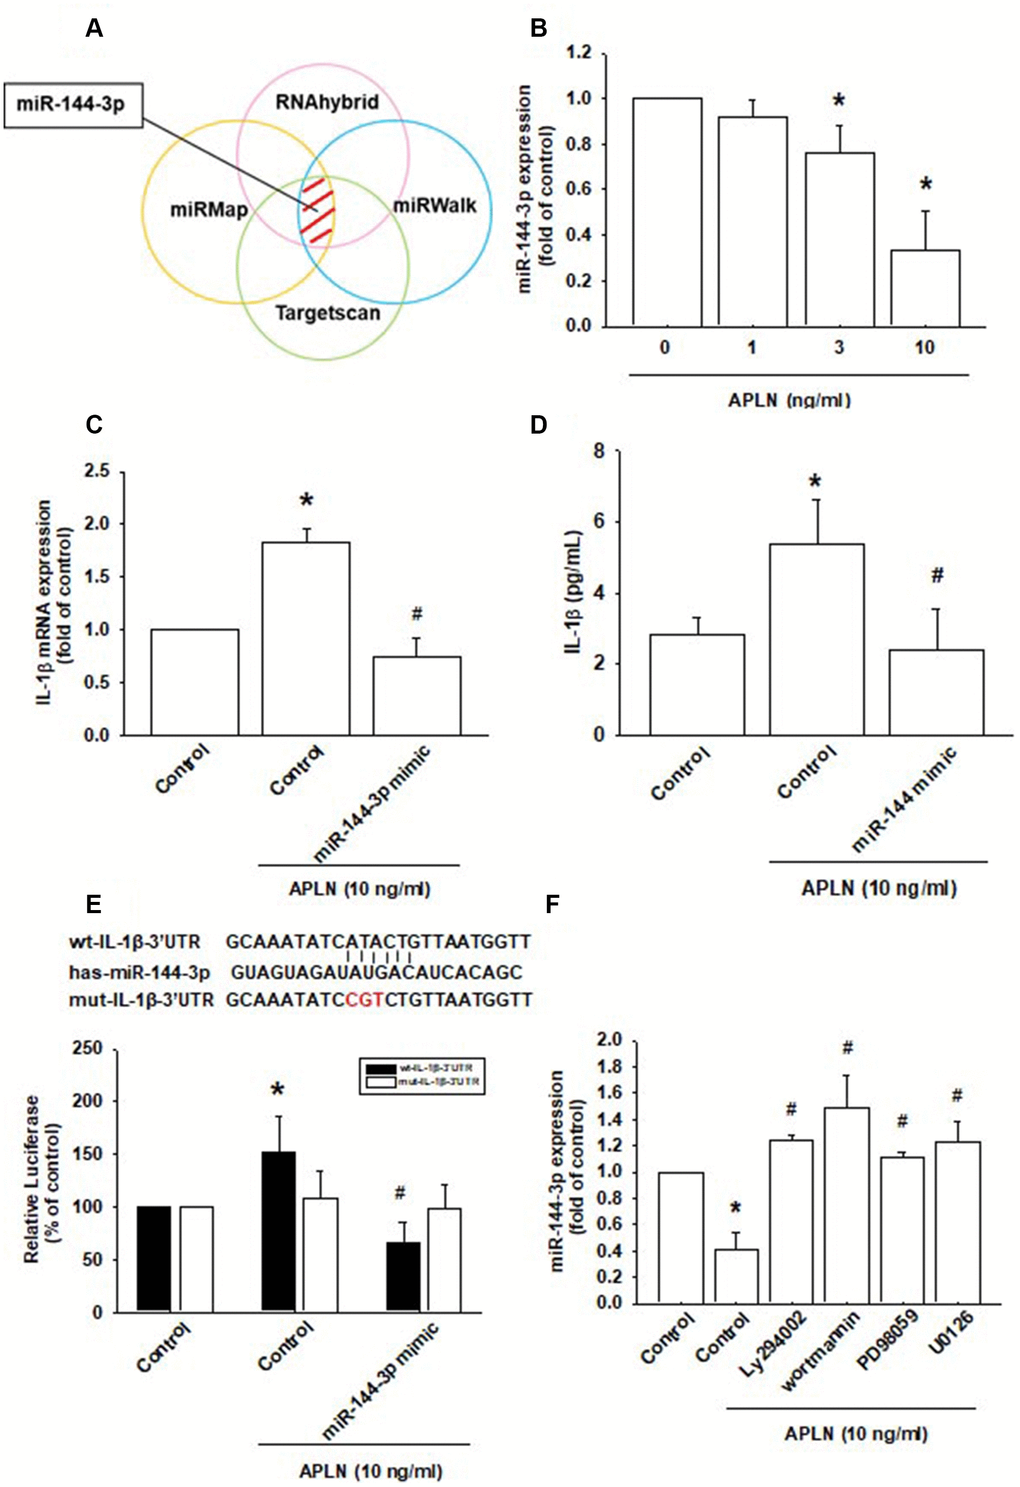 APLN-induced suppression of miRNA-144-3p enhances IL-1β production. (A) Open-source software (TargetScan, miRMap, RNAhybrid, and miRWalk) was used to identify which miRNAs could possibly interfere with IL-1β transcription. (B) OASFs were incubated with APLN (0, 1, 3, and 10 ng/mL). Levels of miR-144-3p expression were examined by RT-qPCR assay (n=4). (C, D) OASFs were transfected with miR-144-3p mimic and then stimulated with APLN (10 ng/mL). mRNA and excreted protein levels were examined by RT-qPCR (n=4) and ELISA assays (n=5). (E) OASFs were transfected with the mut-IL-1β-3′UTR plasmid with or without miRNA-144-3p mimic, then stimulated with APLN (10 ng/mL). Relative luciferase activity reflected IL-1β promoter activity (n=6). (F) OASFs were treated with PI3K or ERK inhibitor then incubated with APLN. miR-144-3p expression levels were examined by RT-qPCR assay (n=4). Results are expressed as the mean ± S.E.M. * pp